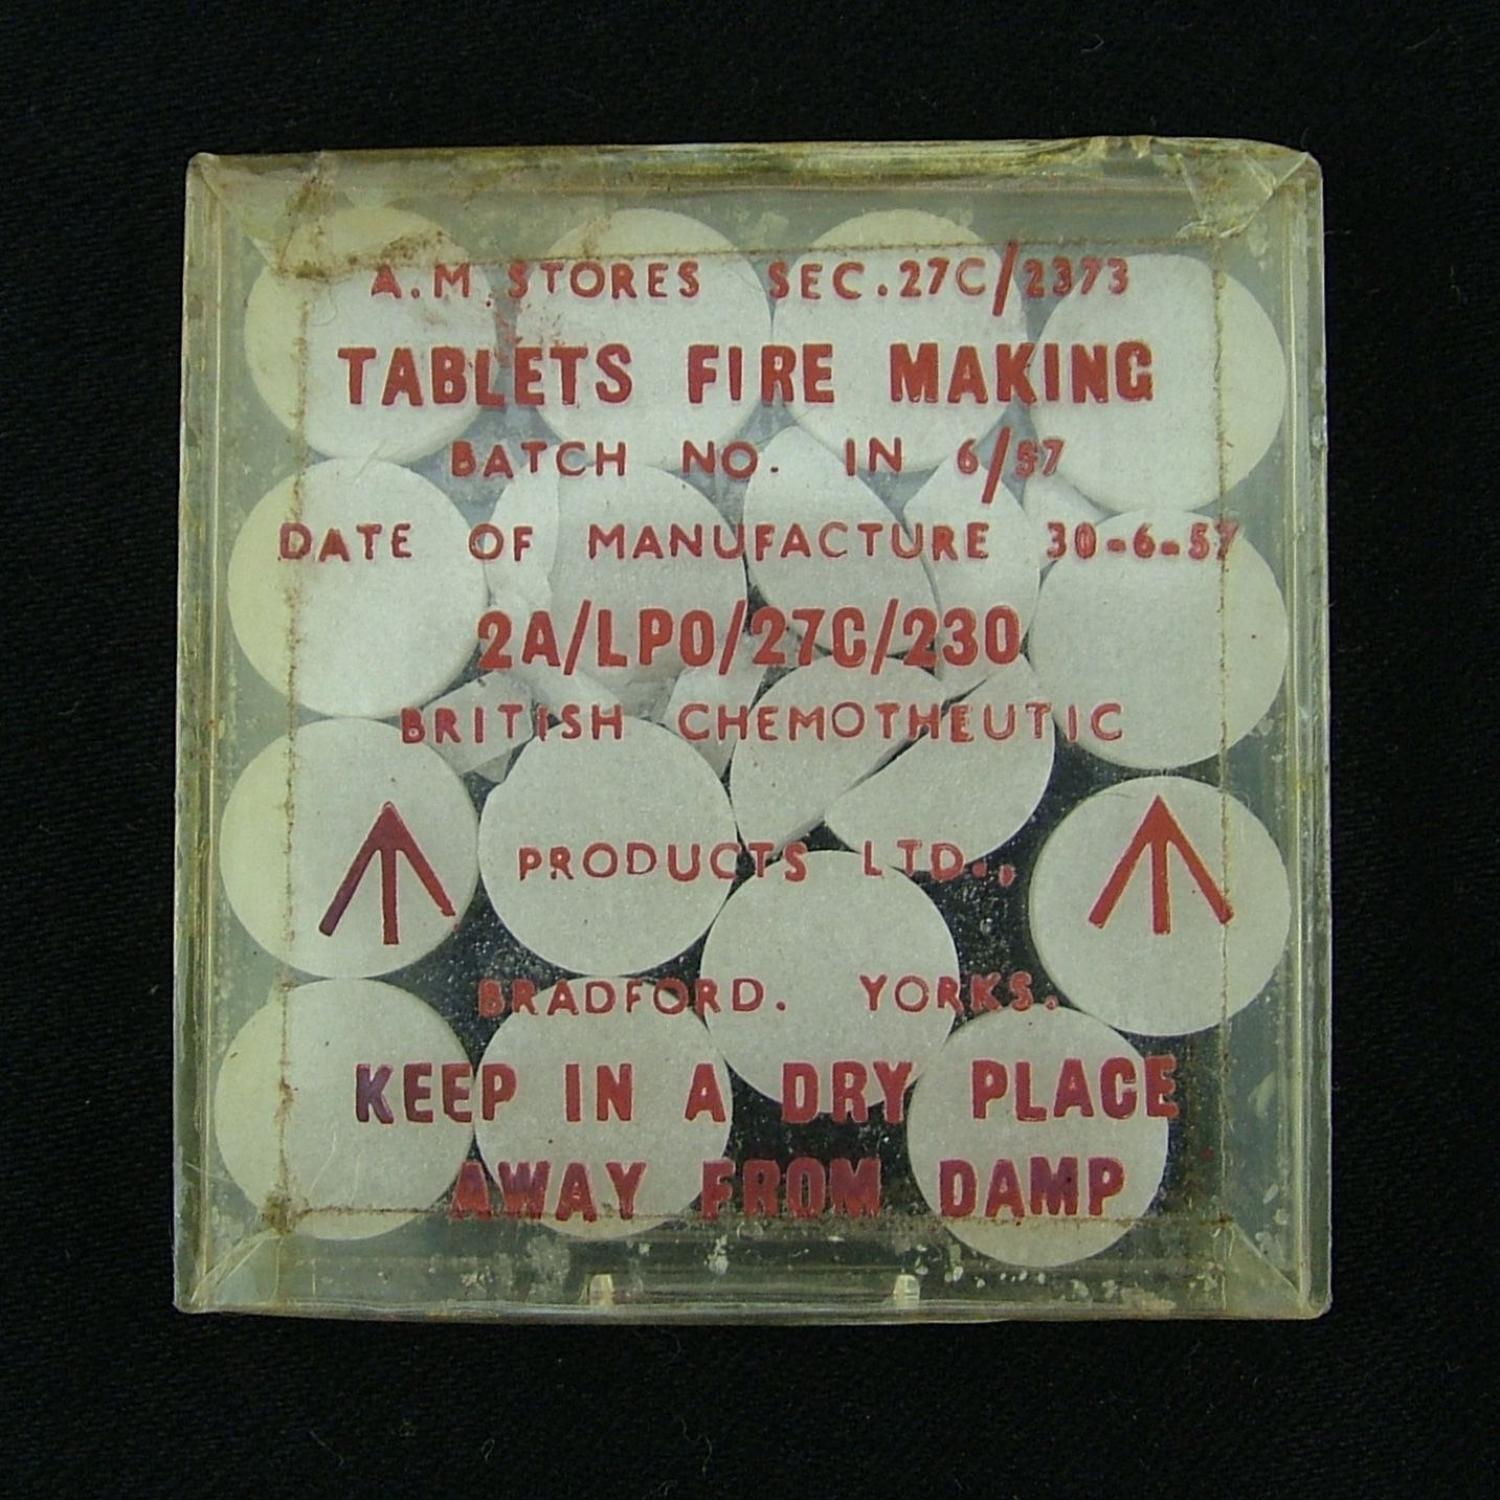 Air Ministry Survival Kit Fire Making Tablets